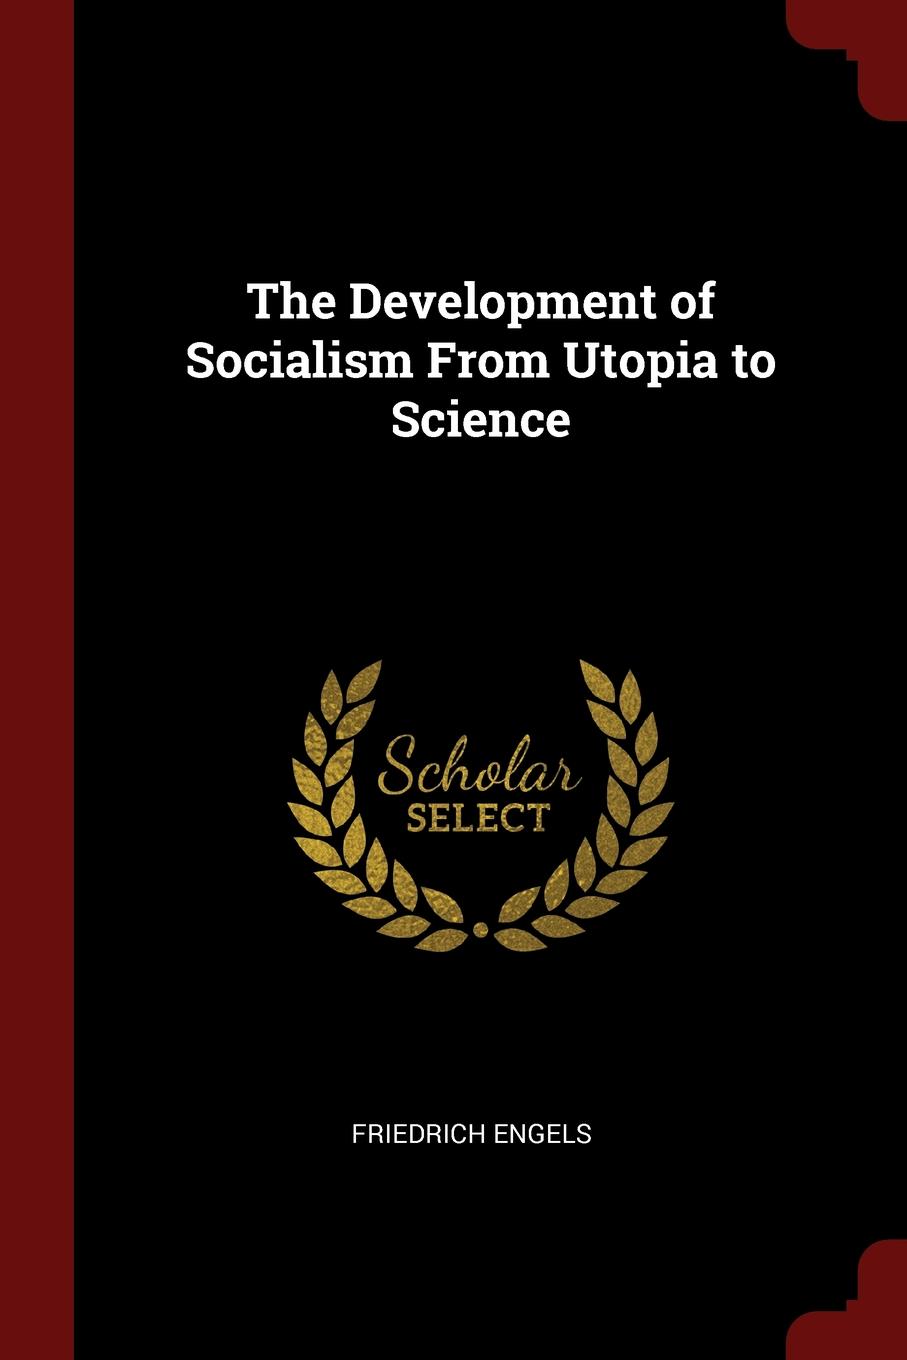 The Development of Socialism From Utopia to Science